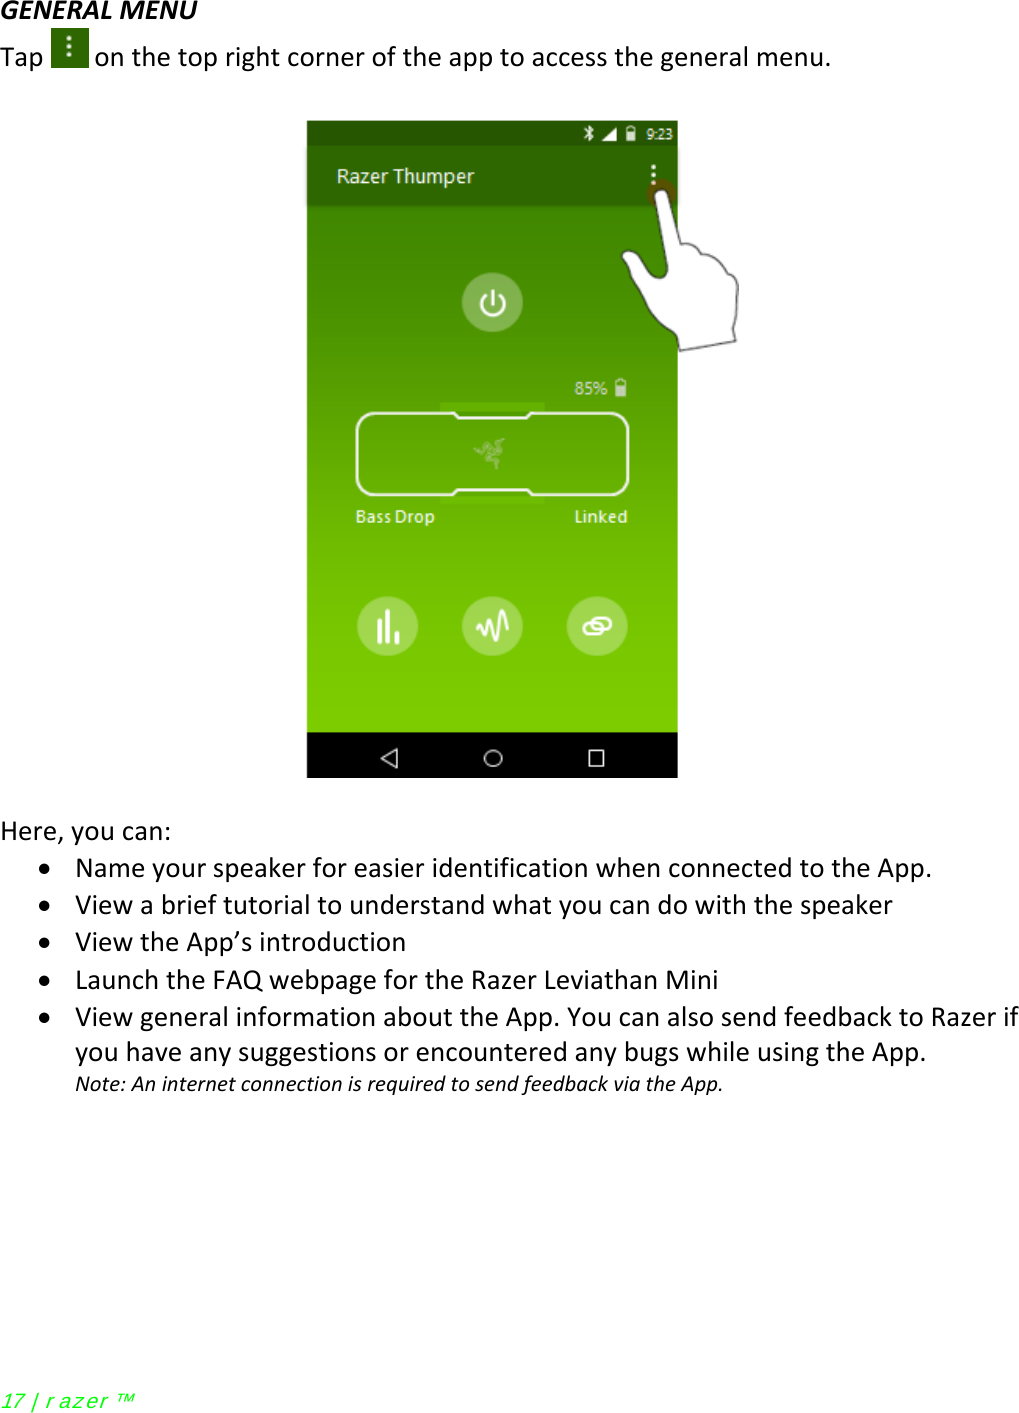  GENERAL MENU Tap   on the top right corner of the app to access the general menu.    Here, you can: • Name your speaker for easier identification when connected to the App. • View a brief tutorial to understand what you can do with the speaker • View the App’s introduction  • Launch the FAQ webpage for the Razer Leviathan Mini • View general information about the App. You can also send feedback to Razer if you have any suggestions or encountered any bugs while using the App. Note: An internet connection is required to send feedback via the App.  17 | r azer ™ 